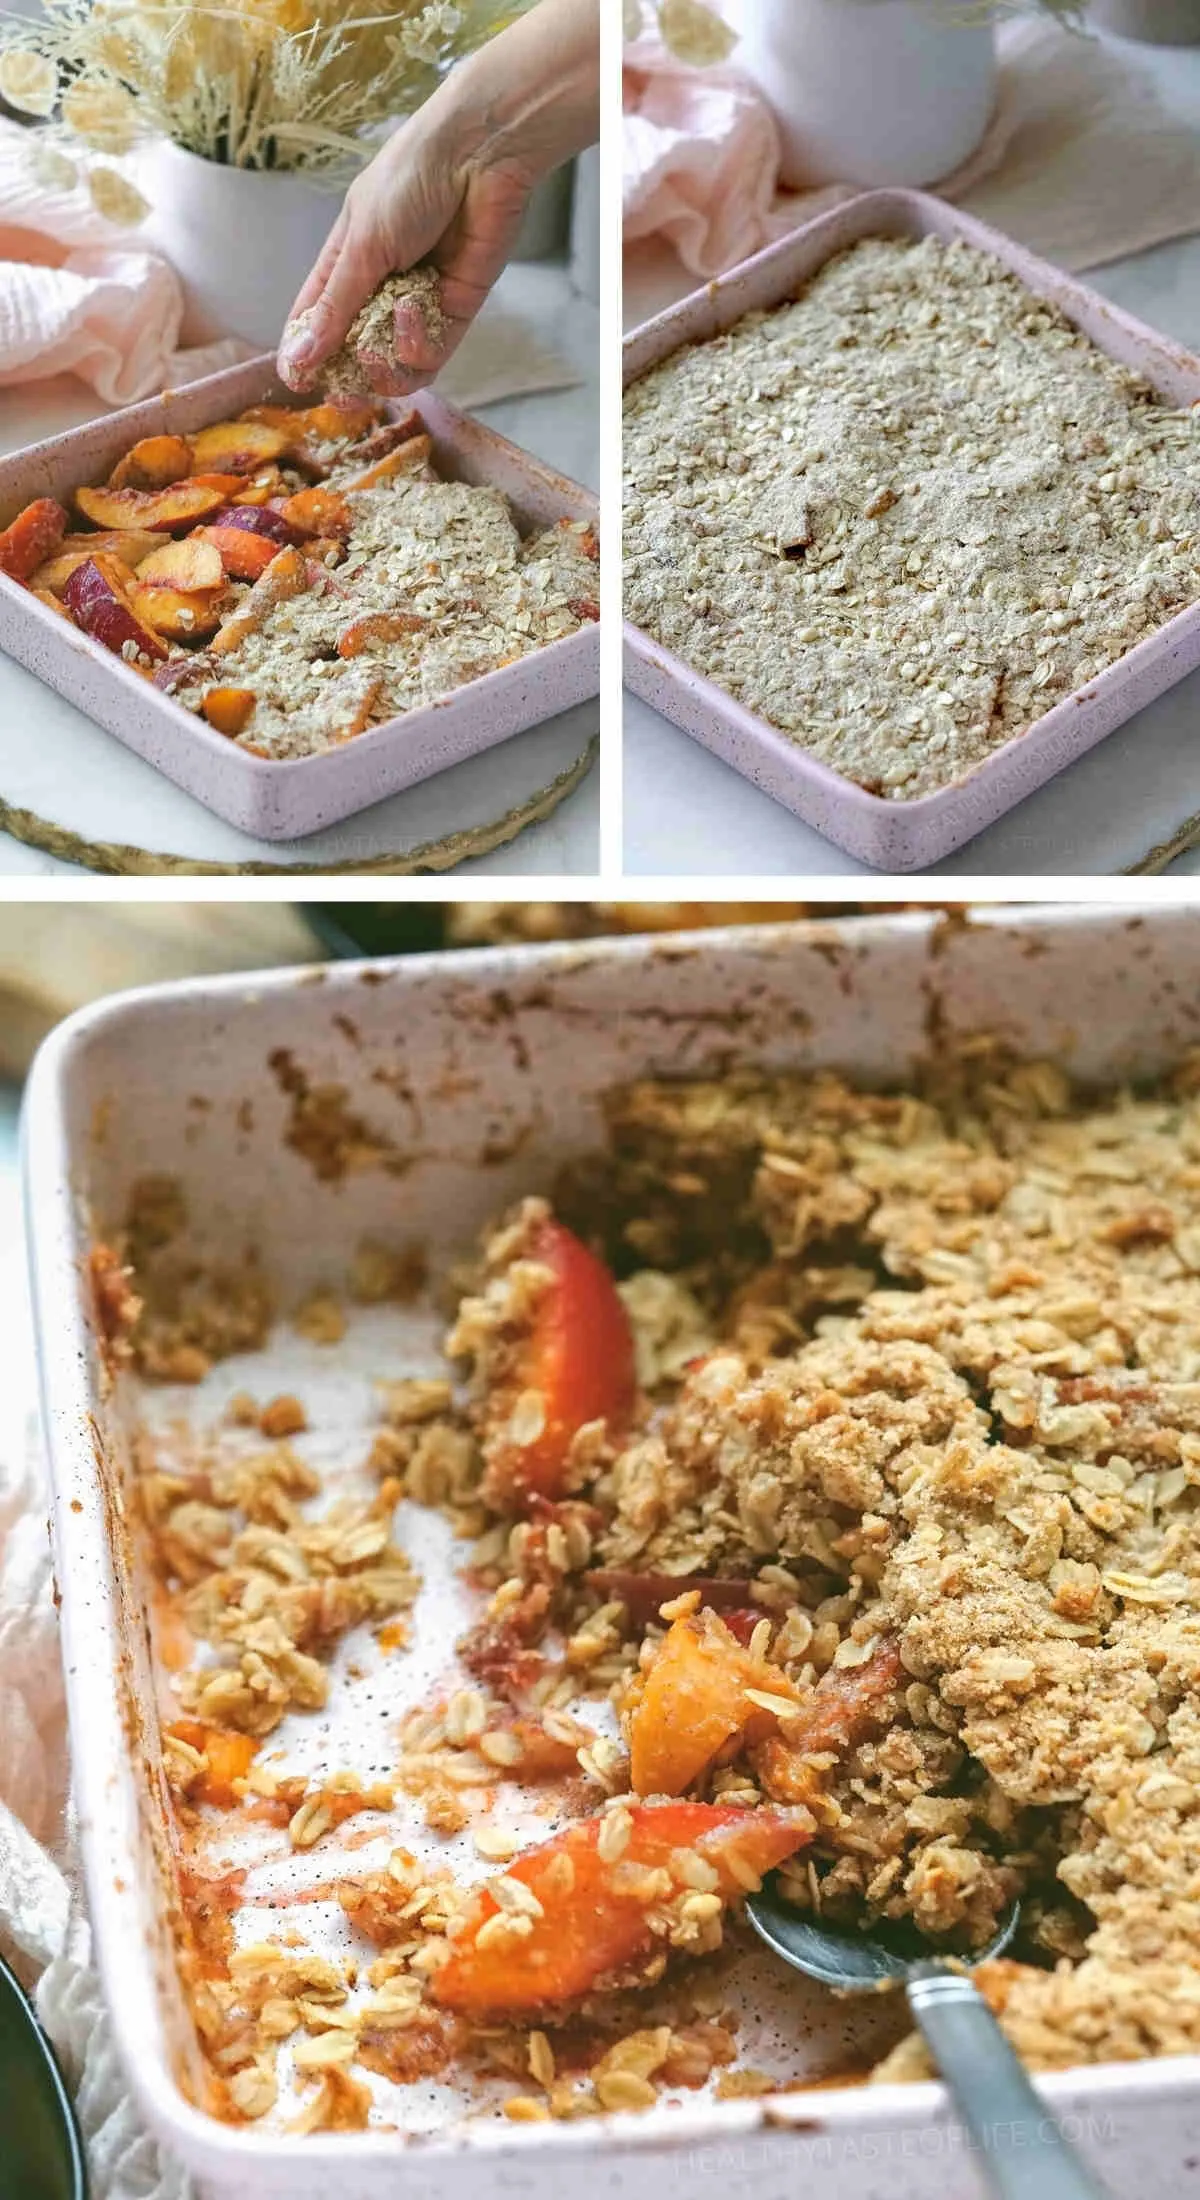 Process shots showing how to put together the peach filling and crumble topping for the peach crisp recipe.